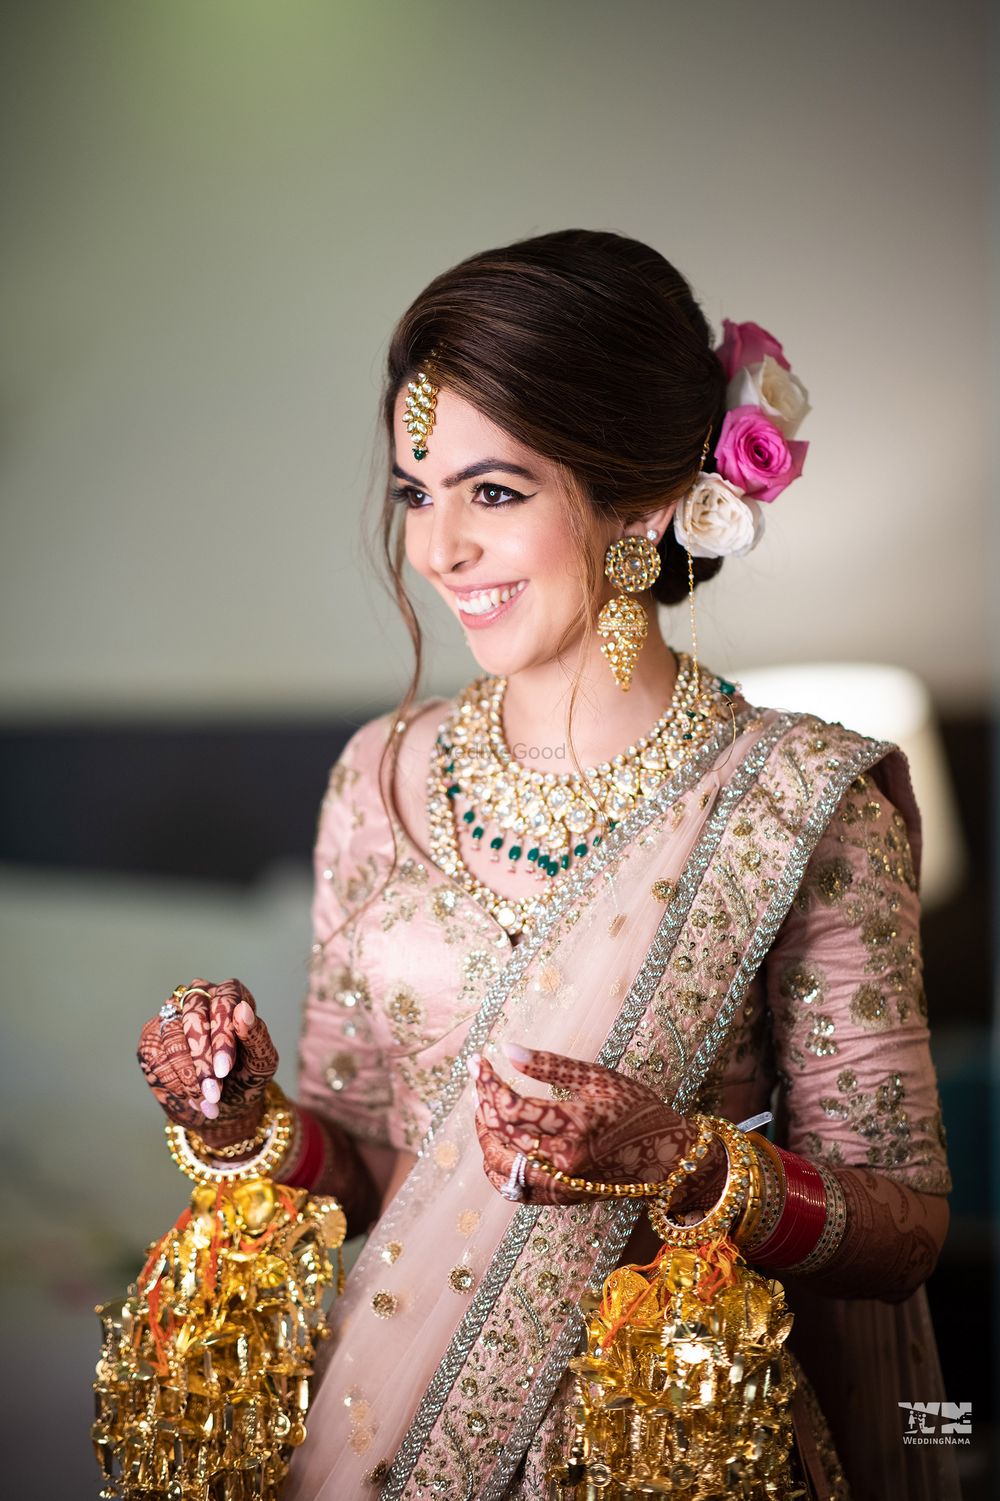 Photo of A bride in a blush pink lehenga and gold jewelry smiling for the camera